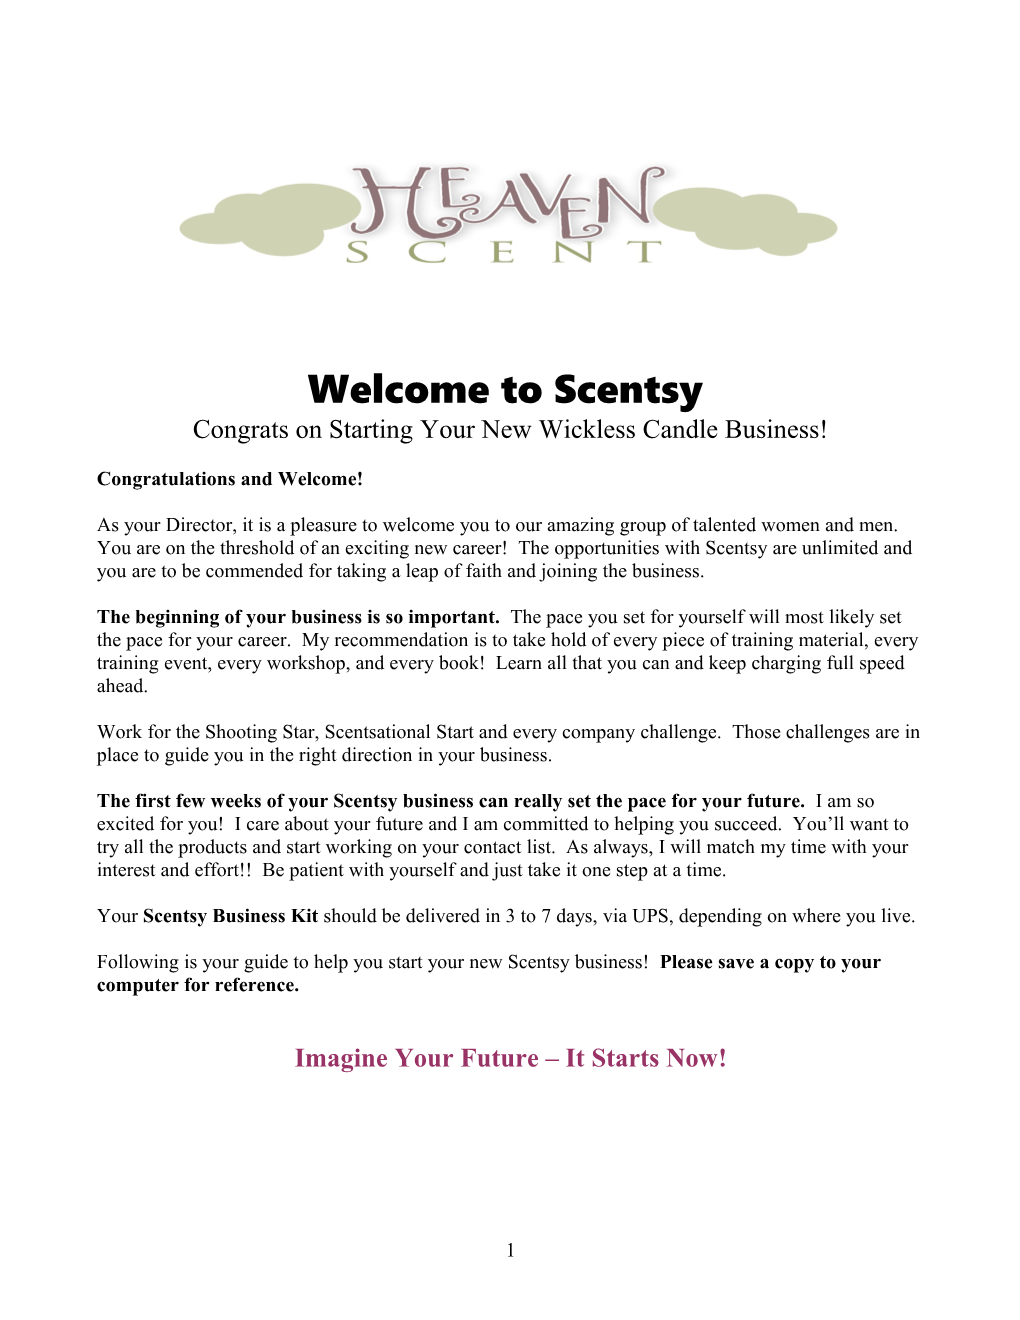 Welcome to Scentsy Congrats on Starting Your New Wickless Candle Business!